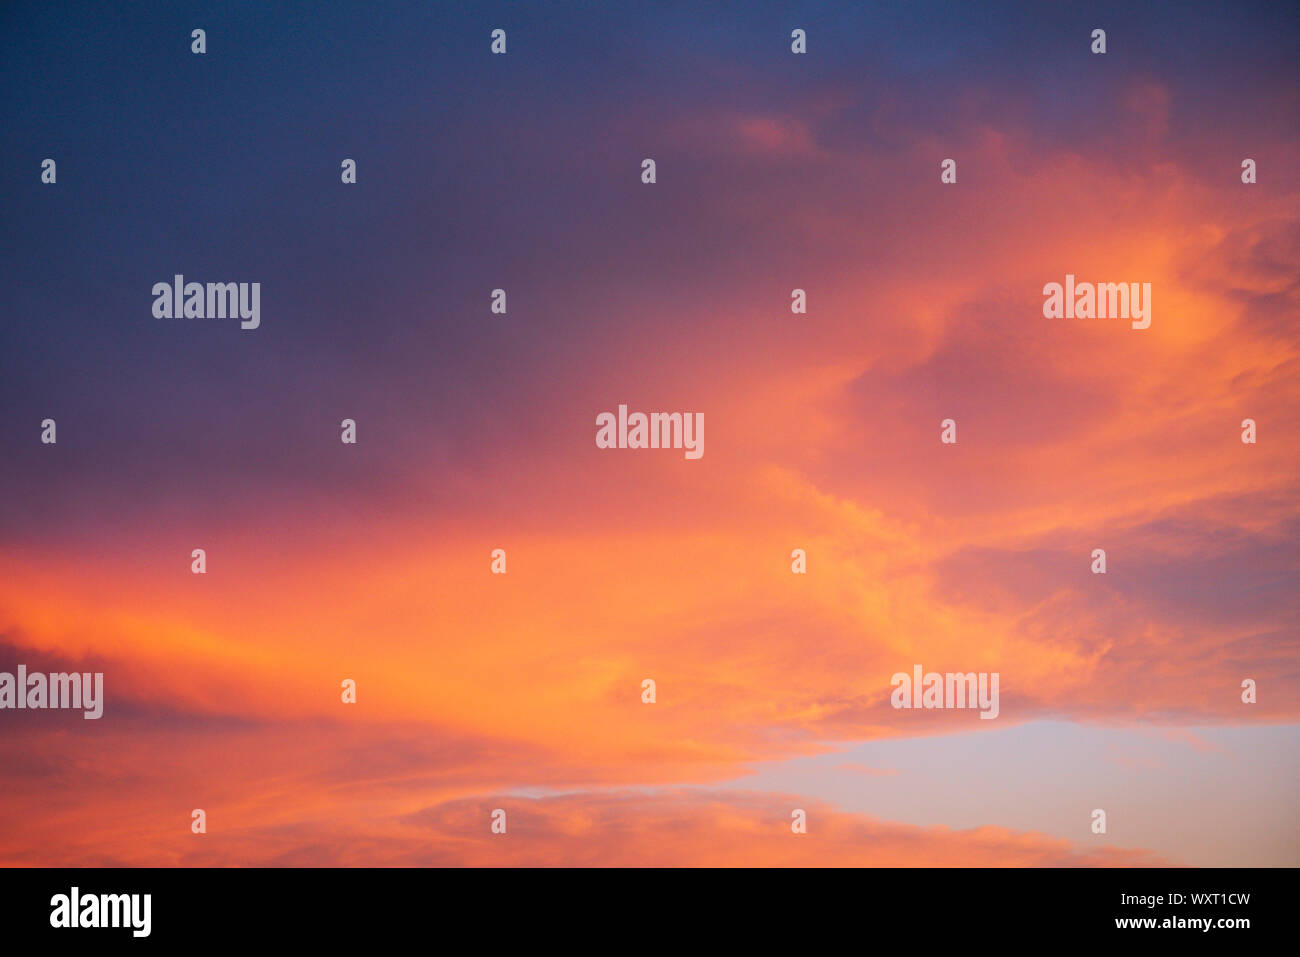 Sunset sky abstract, colorful sunset clouds no ground Stock Photo